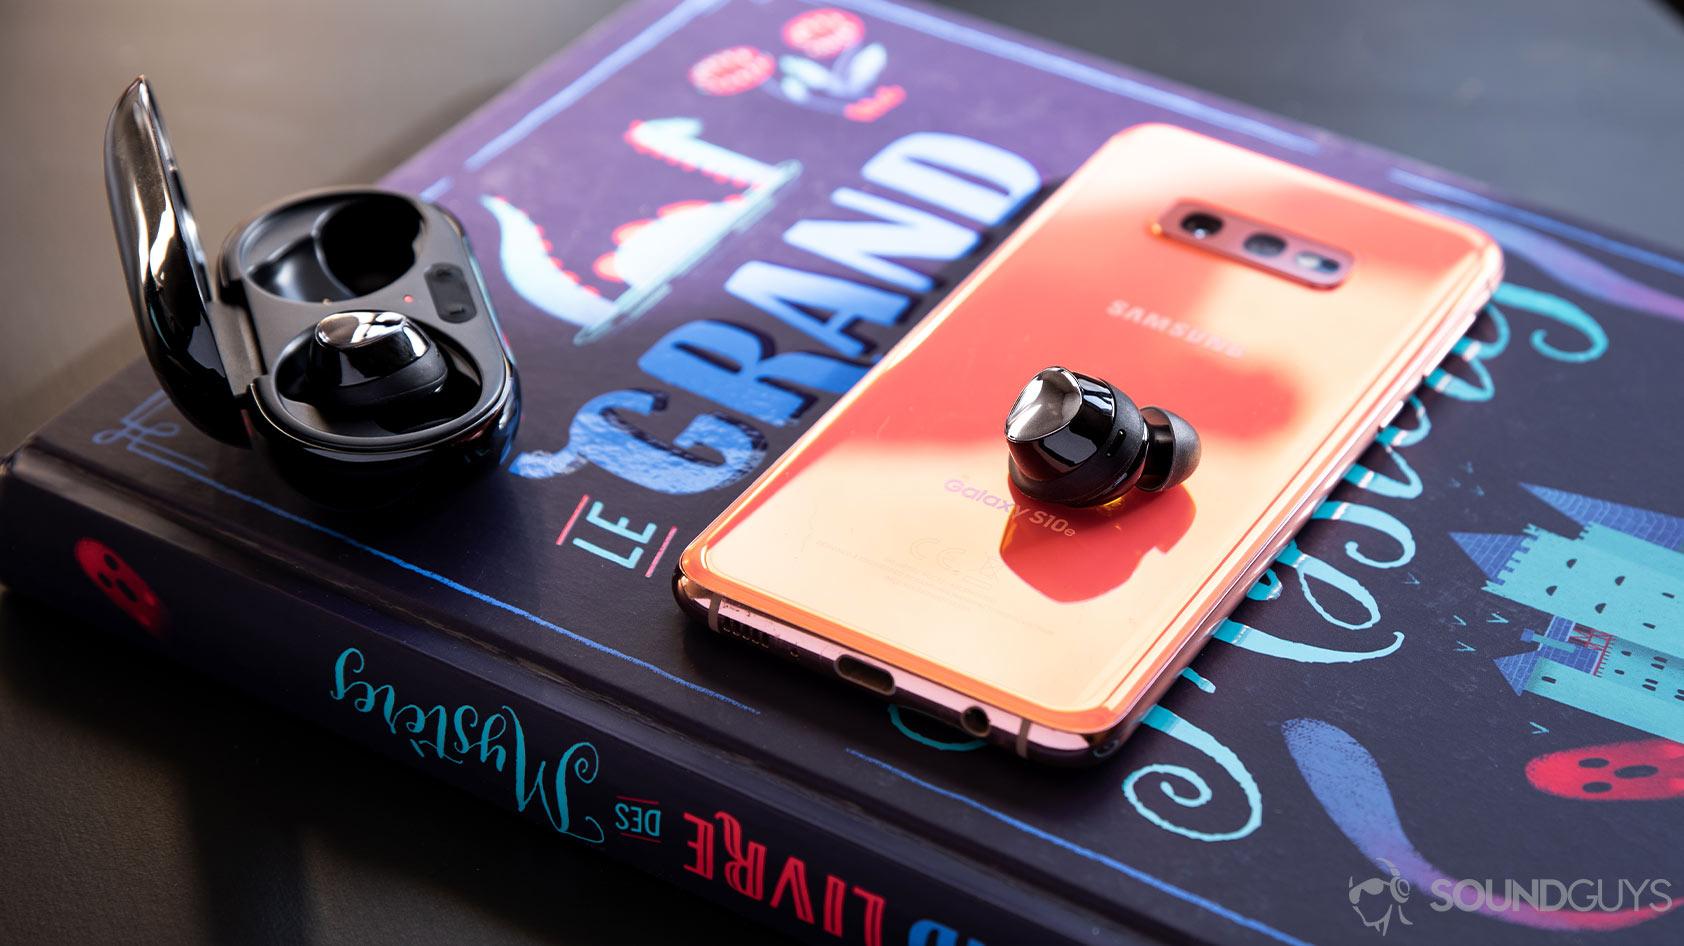 A picture of the Samsung Galaxy Buds Plus earbud atop a Galaxy S10e smartphone with the charging case open and off to the left-side of the frame.